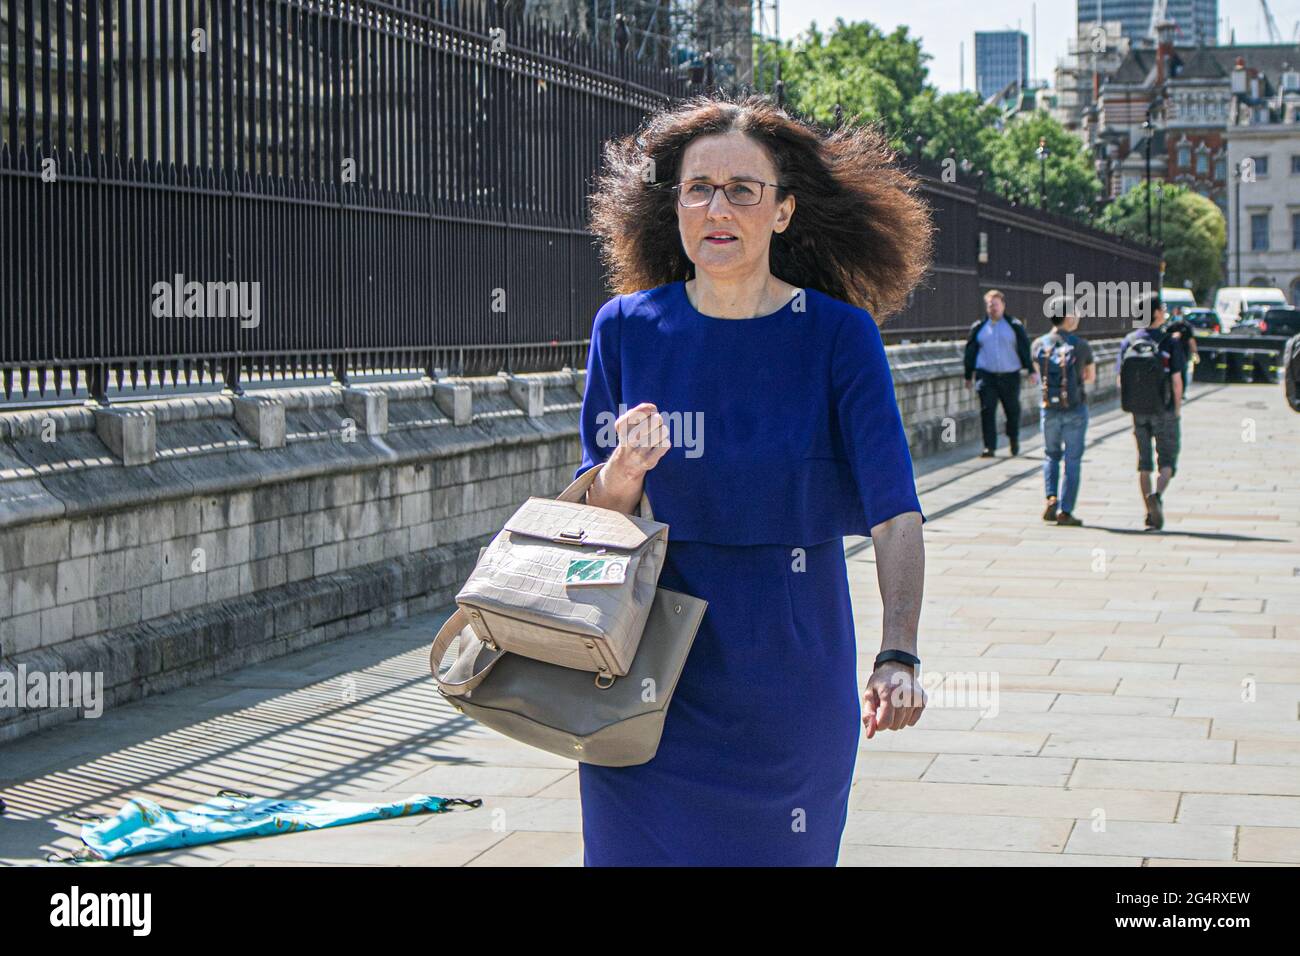 WESTMINSTER LONDON 23 June 2021. Theresa Villiers, Conservative MP for Chipping Barnet who served as Secretary of State for Environment, Food and Rural Affairs from 2019 to 2020 arrives at Parliament. Credit amer ghazzal/Alamy Live News Stock Photo